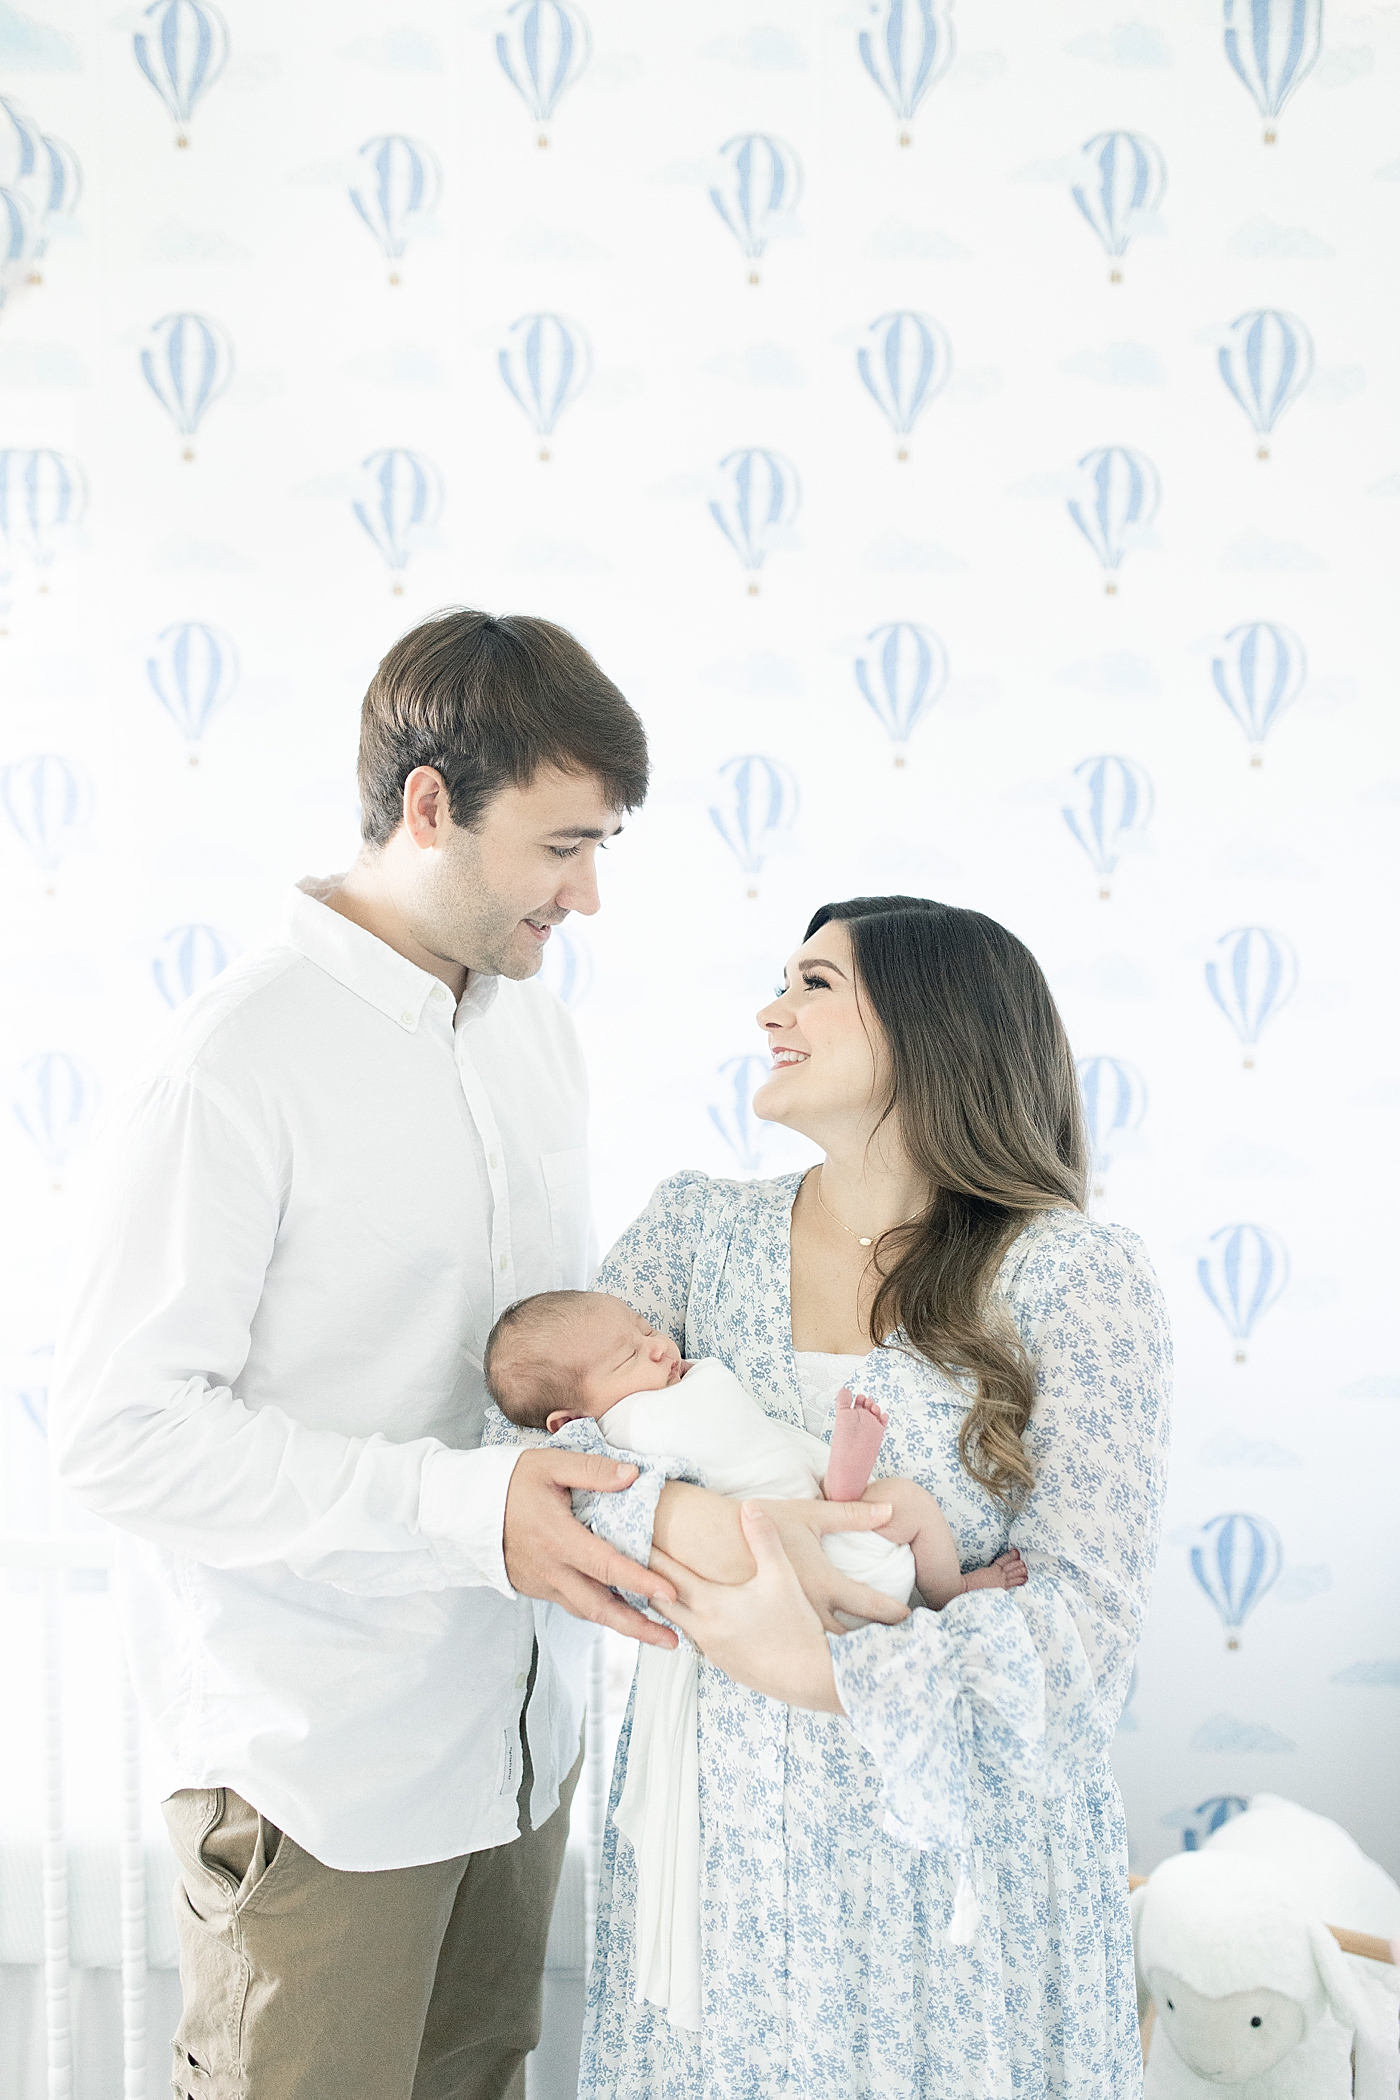 Mom and dad smiling while holding their baby | Photo by Long Beach Newborn Photographer Little Sunshine Photography